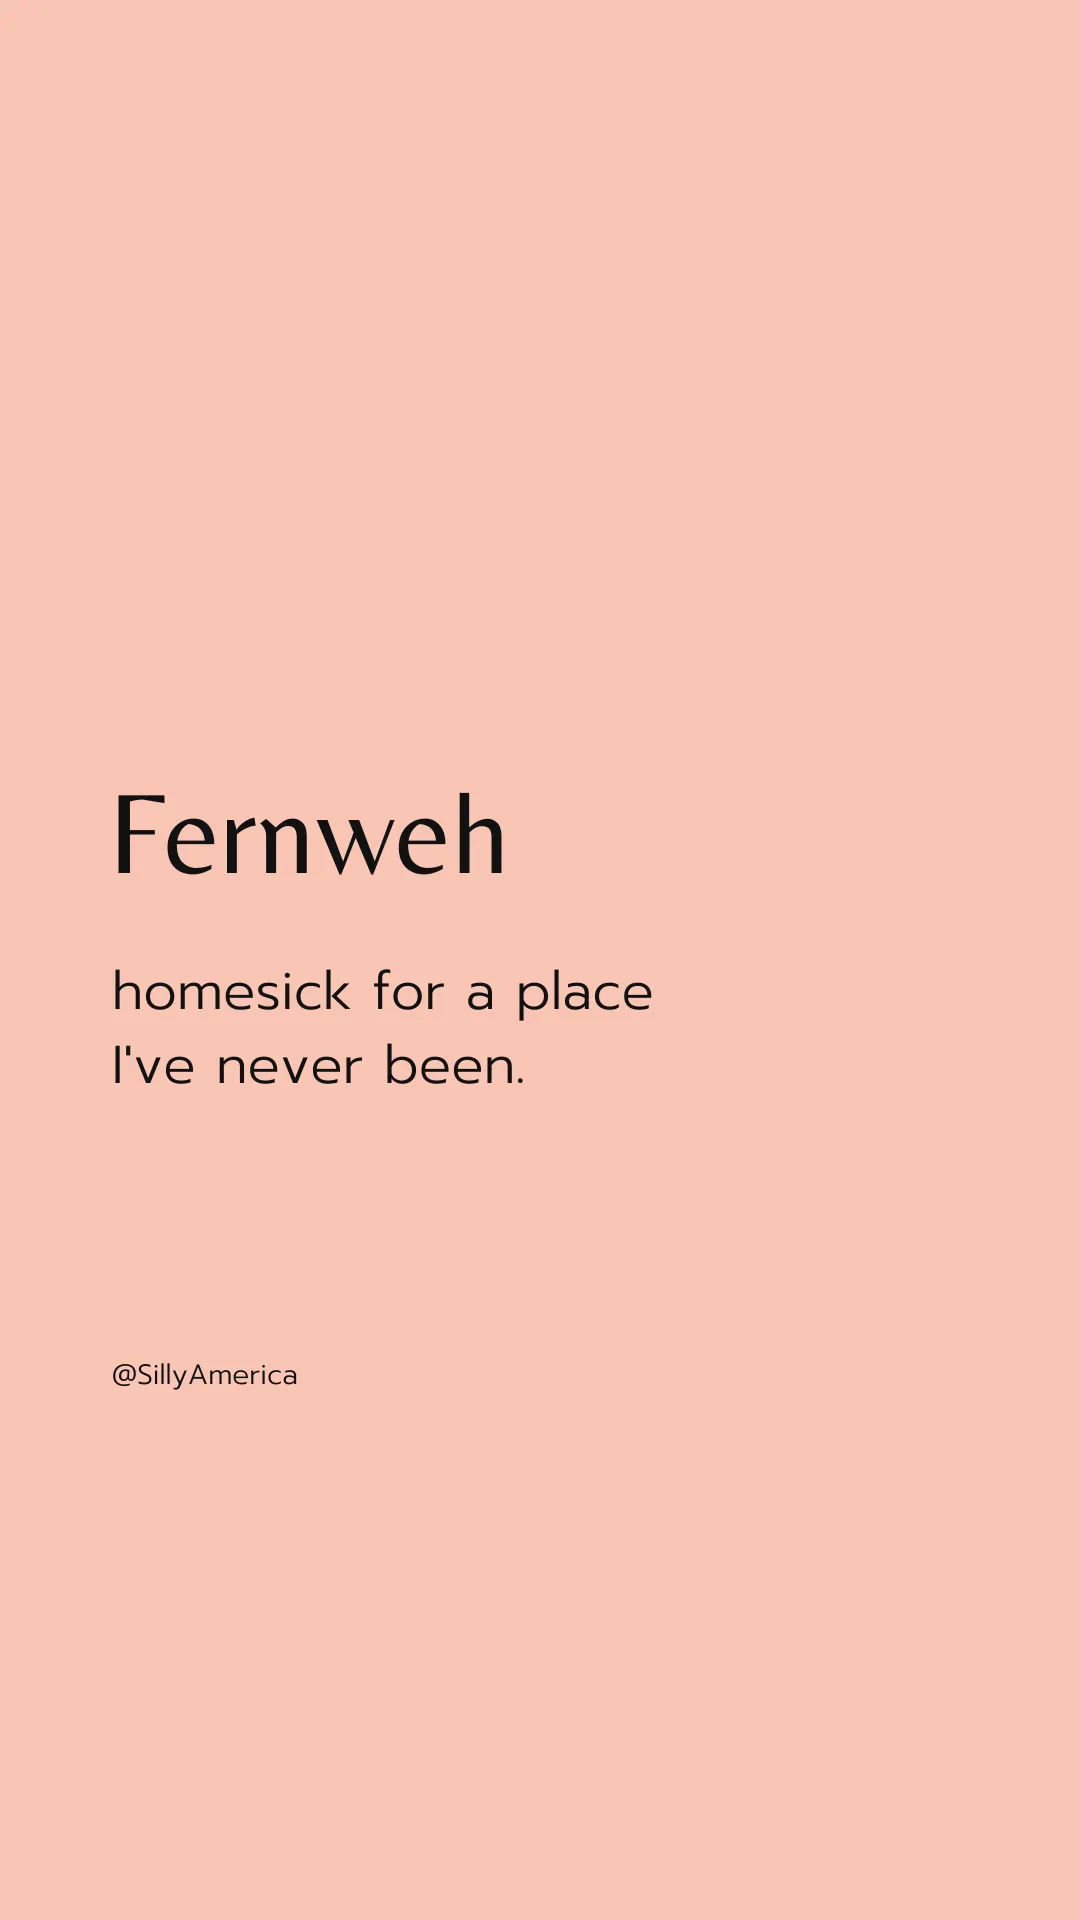 Fernweh: homesick for a place I've never been. - Road Trip Captions for Instagram